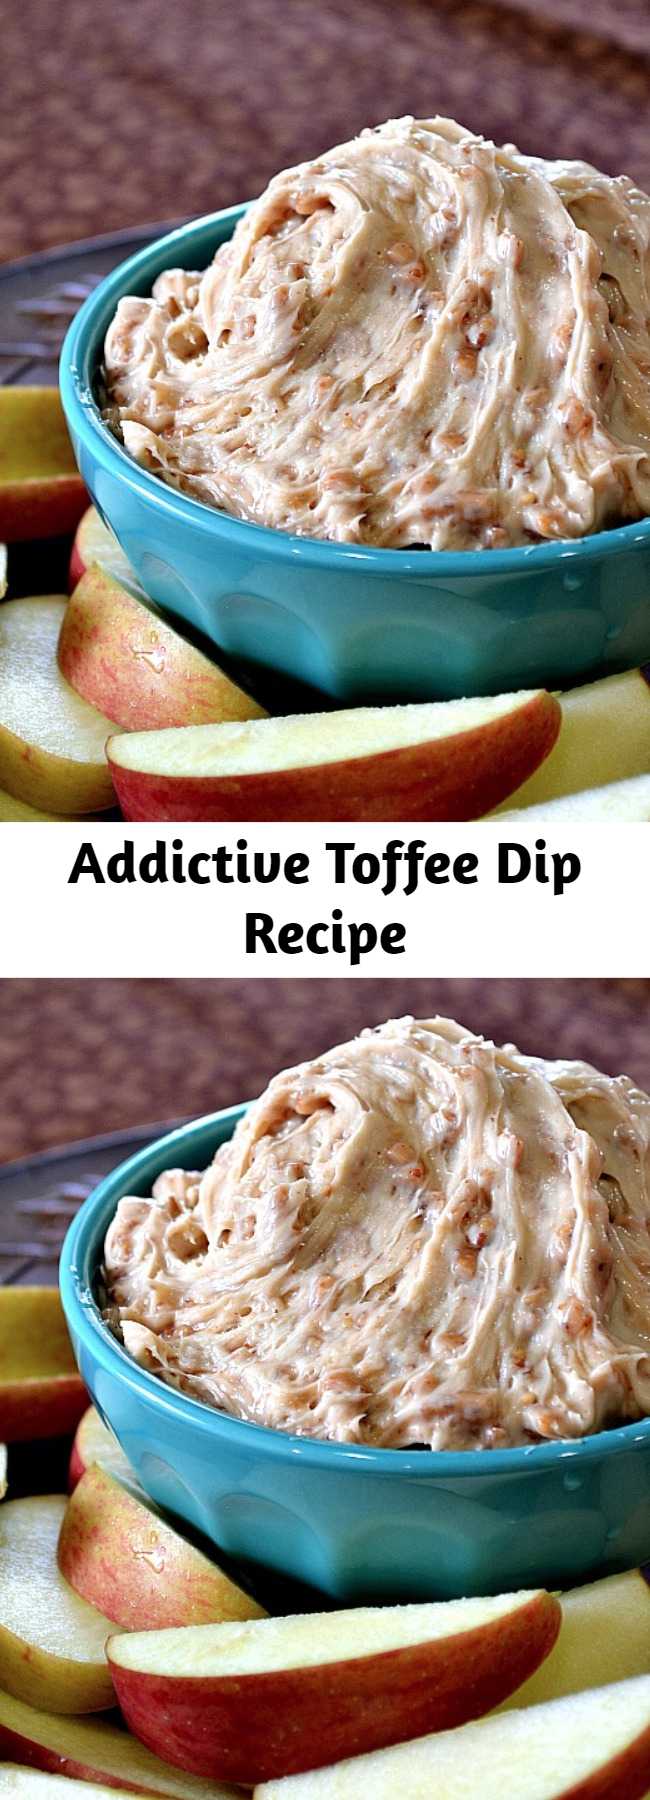 Addictive Toffee Dip Recipe - If your guests love caramel apples then they will LOVE this Toffee Dip! Serve this dip with apple slices. Tastes like a caramel apple without the chewy sticky mess.